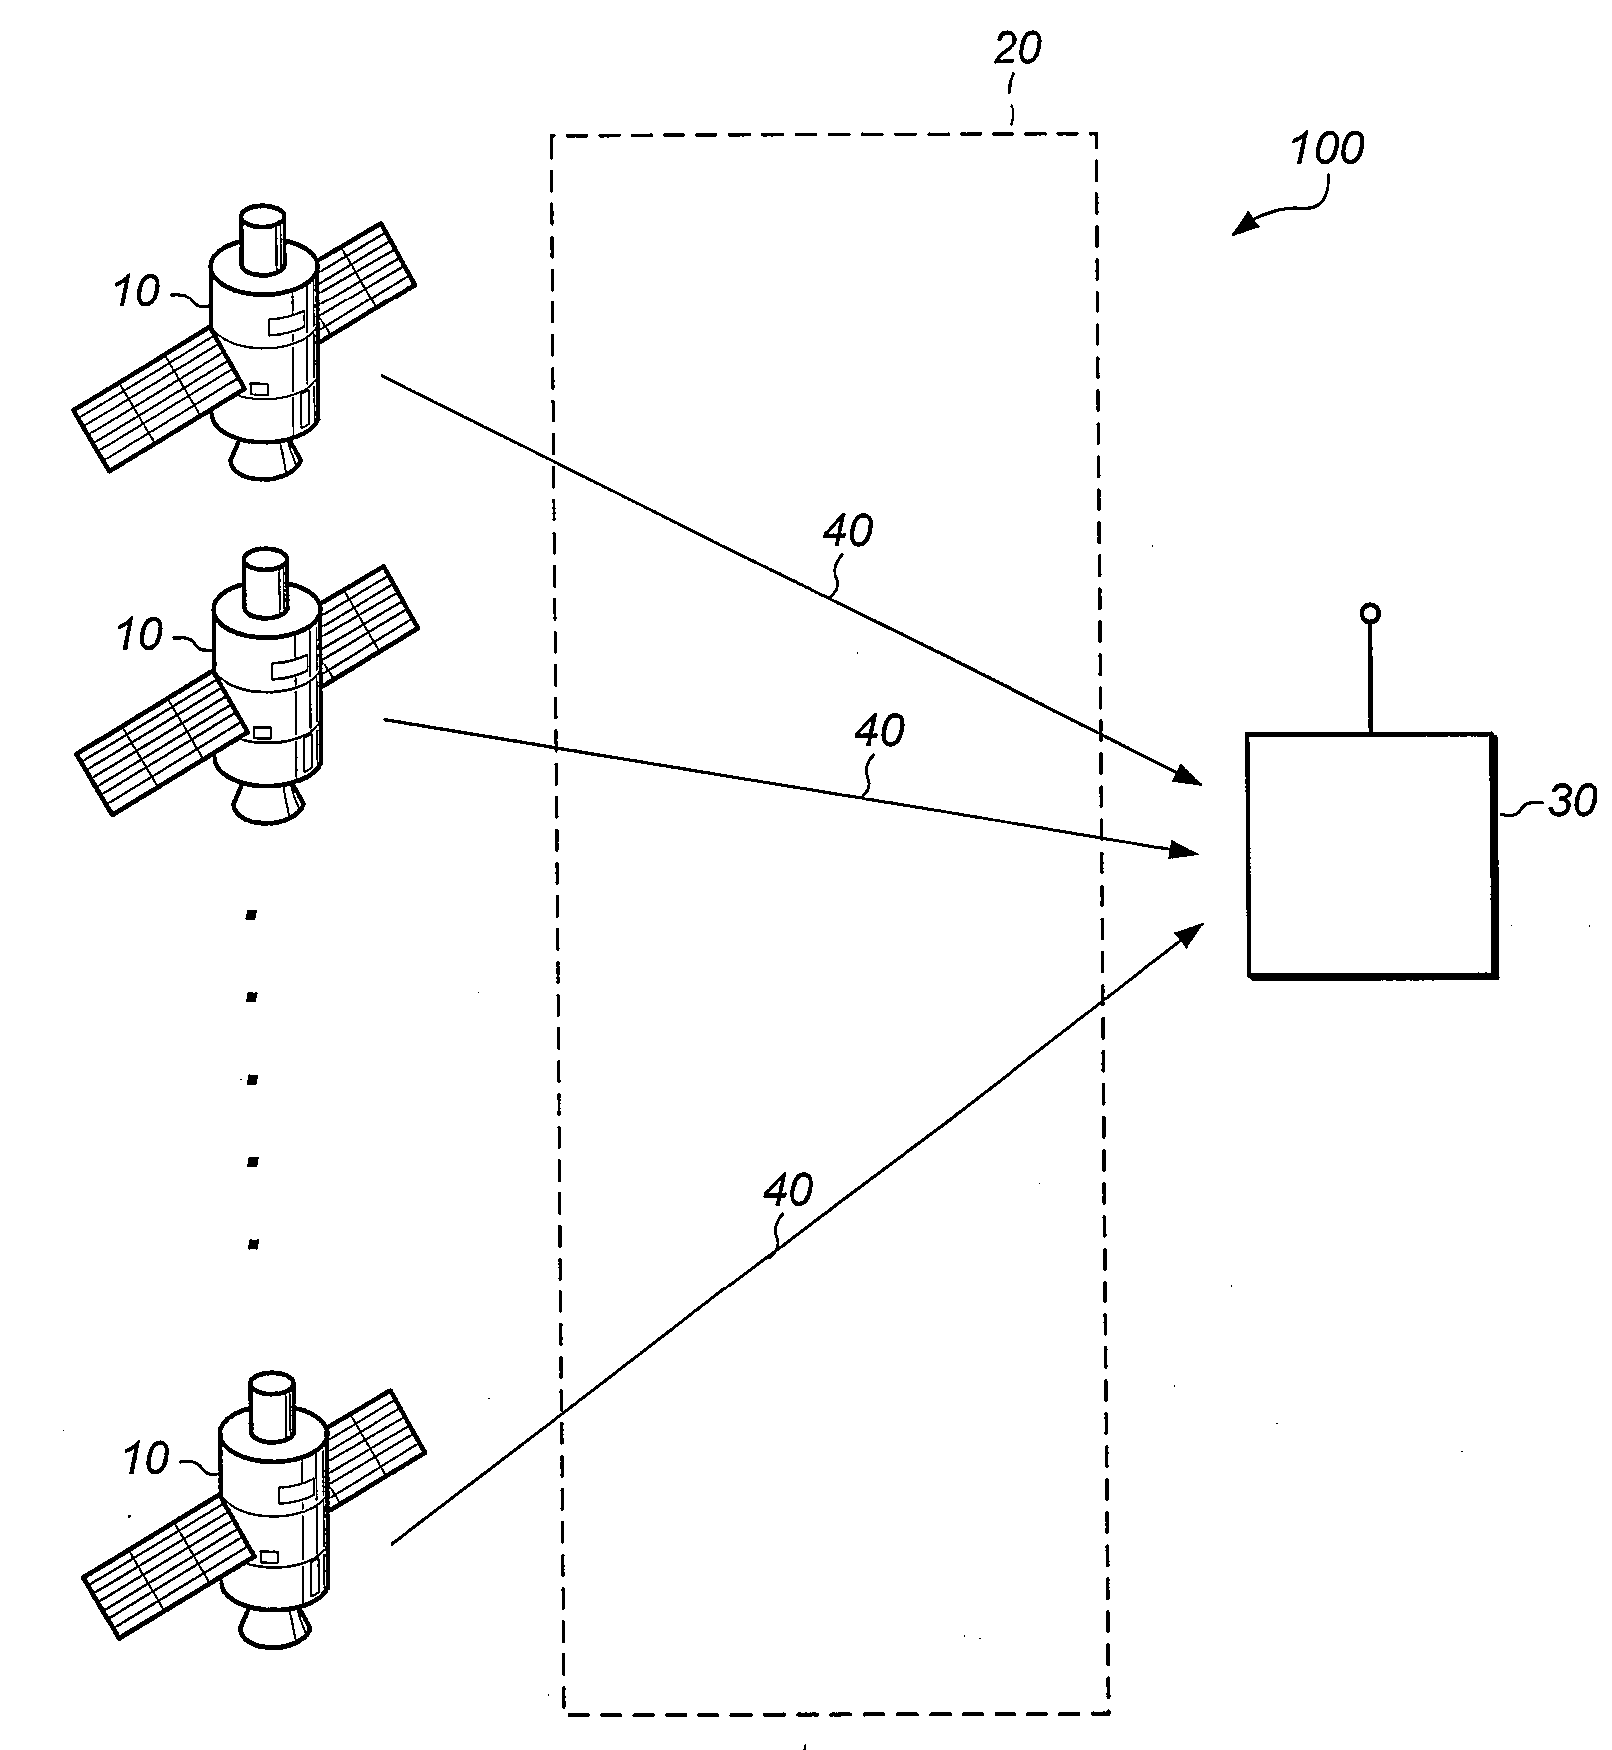 Crosscorrelation interference mitigating position estimation systems and methods therefor